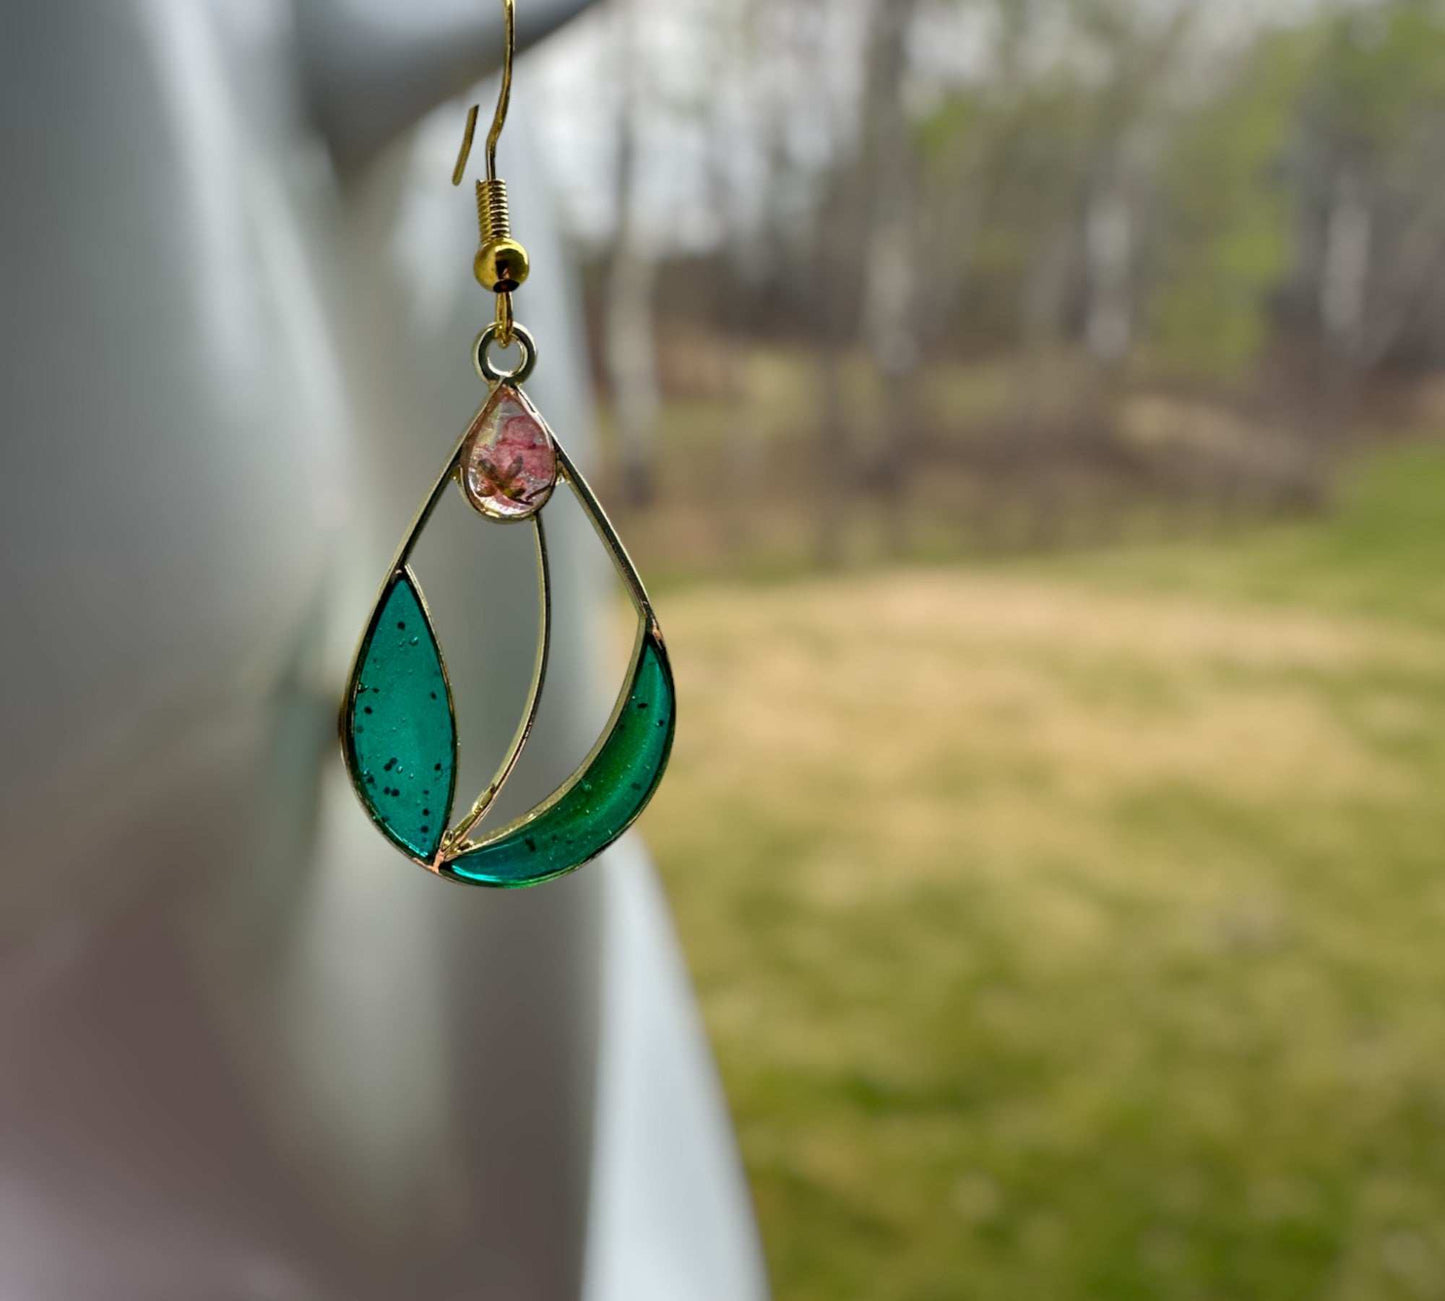 Spring Blossom Tulip Earrings: Handcrafted Floral Accessories